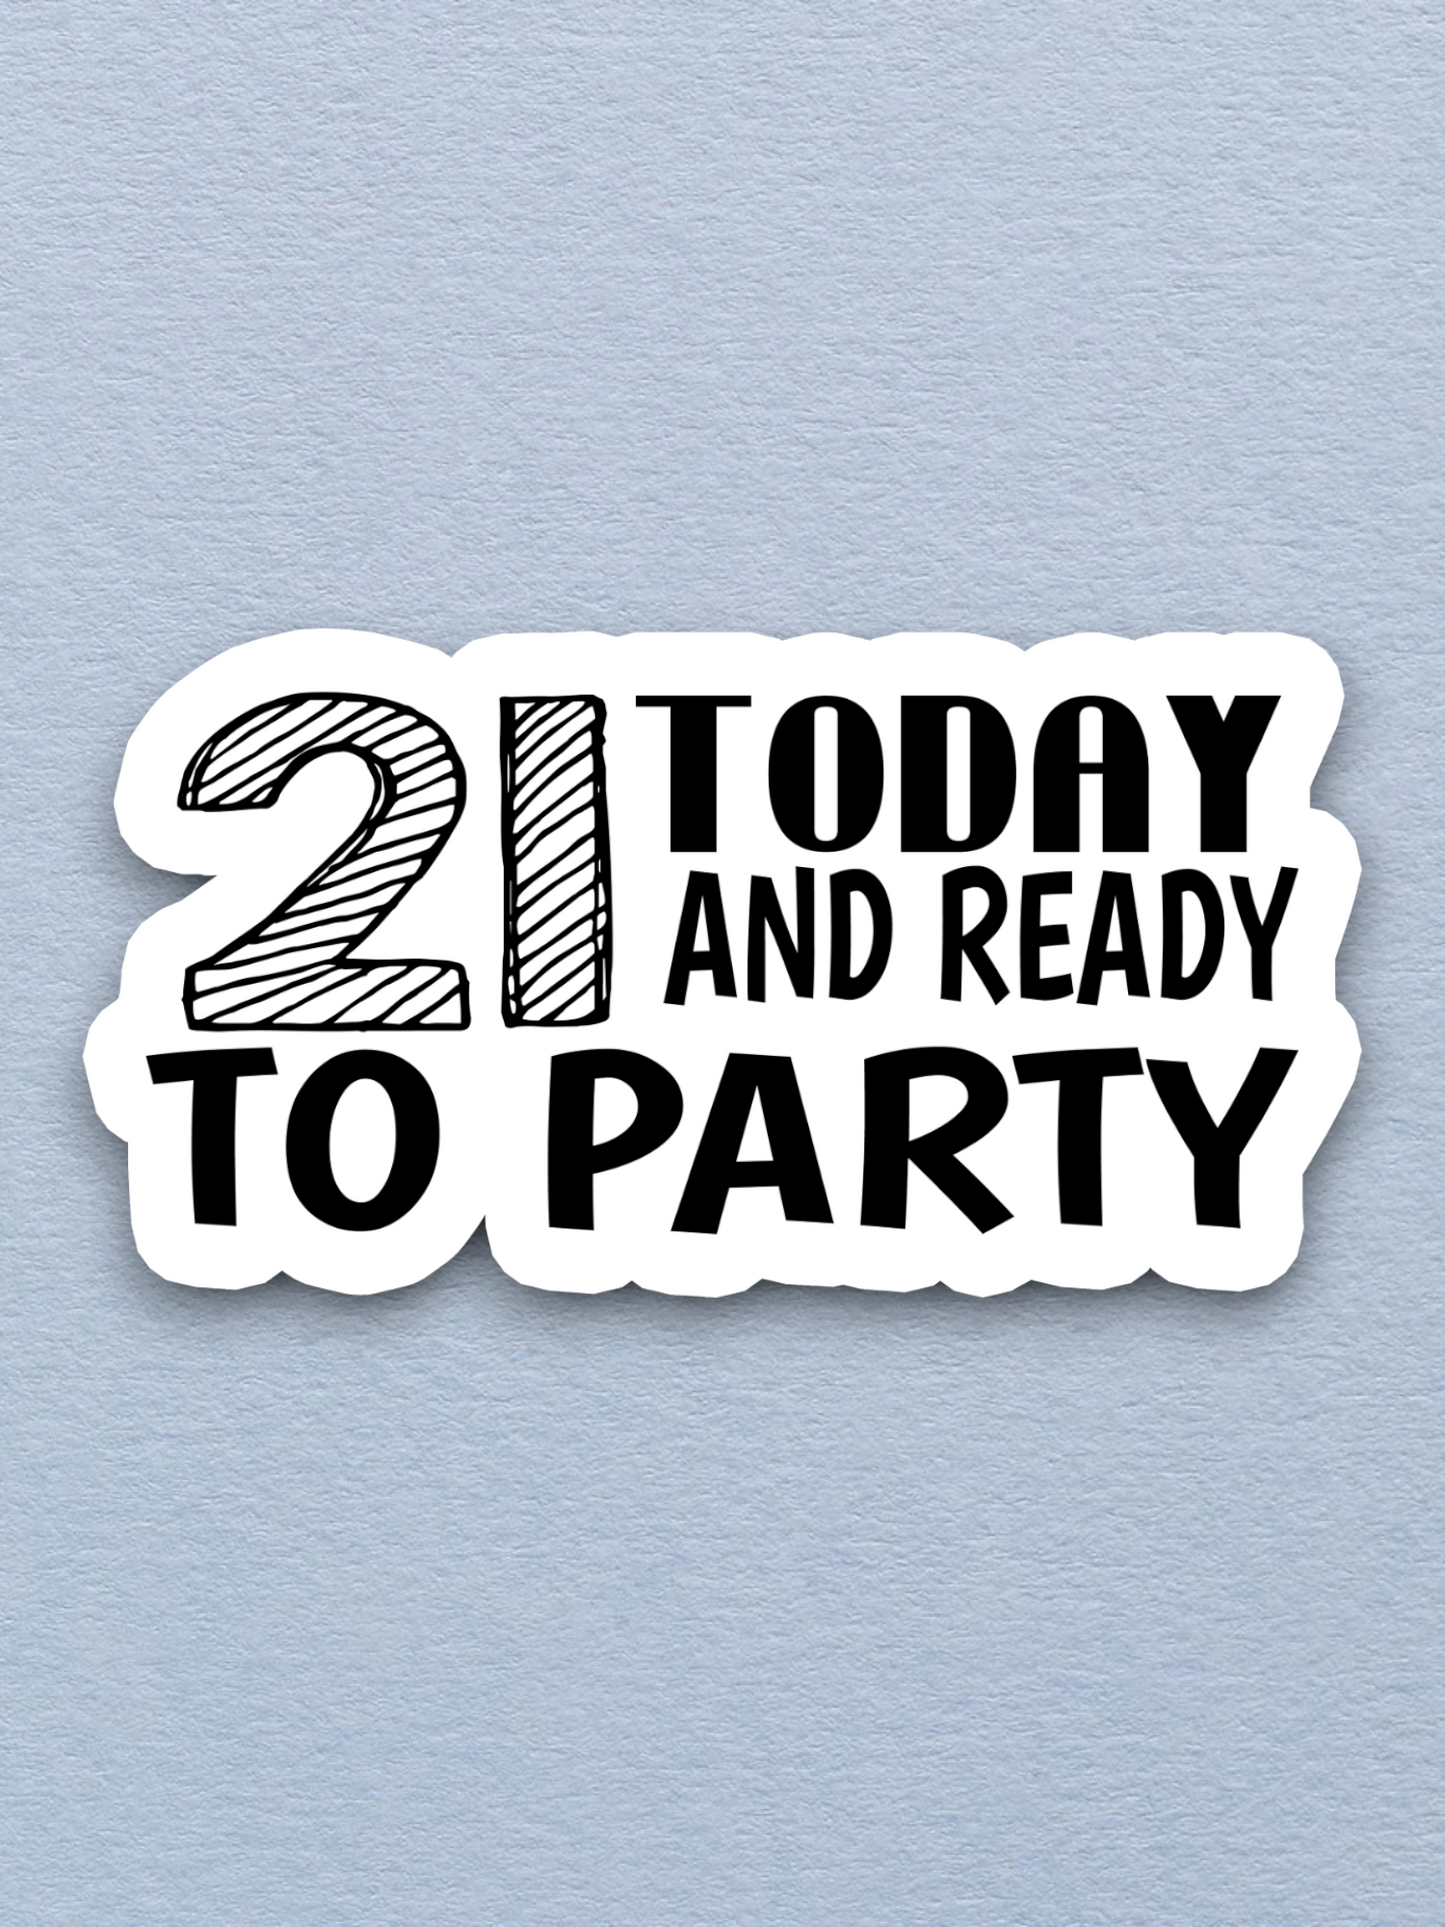 21 Today and Ready to Party Sticker